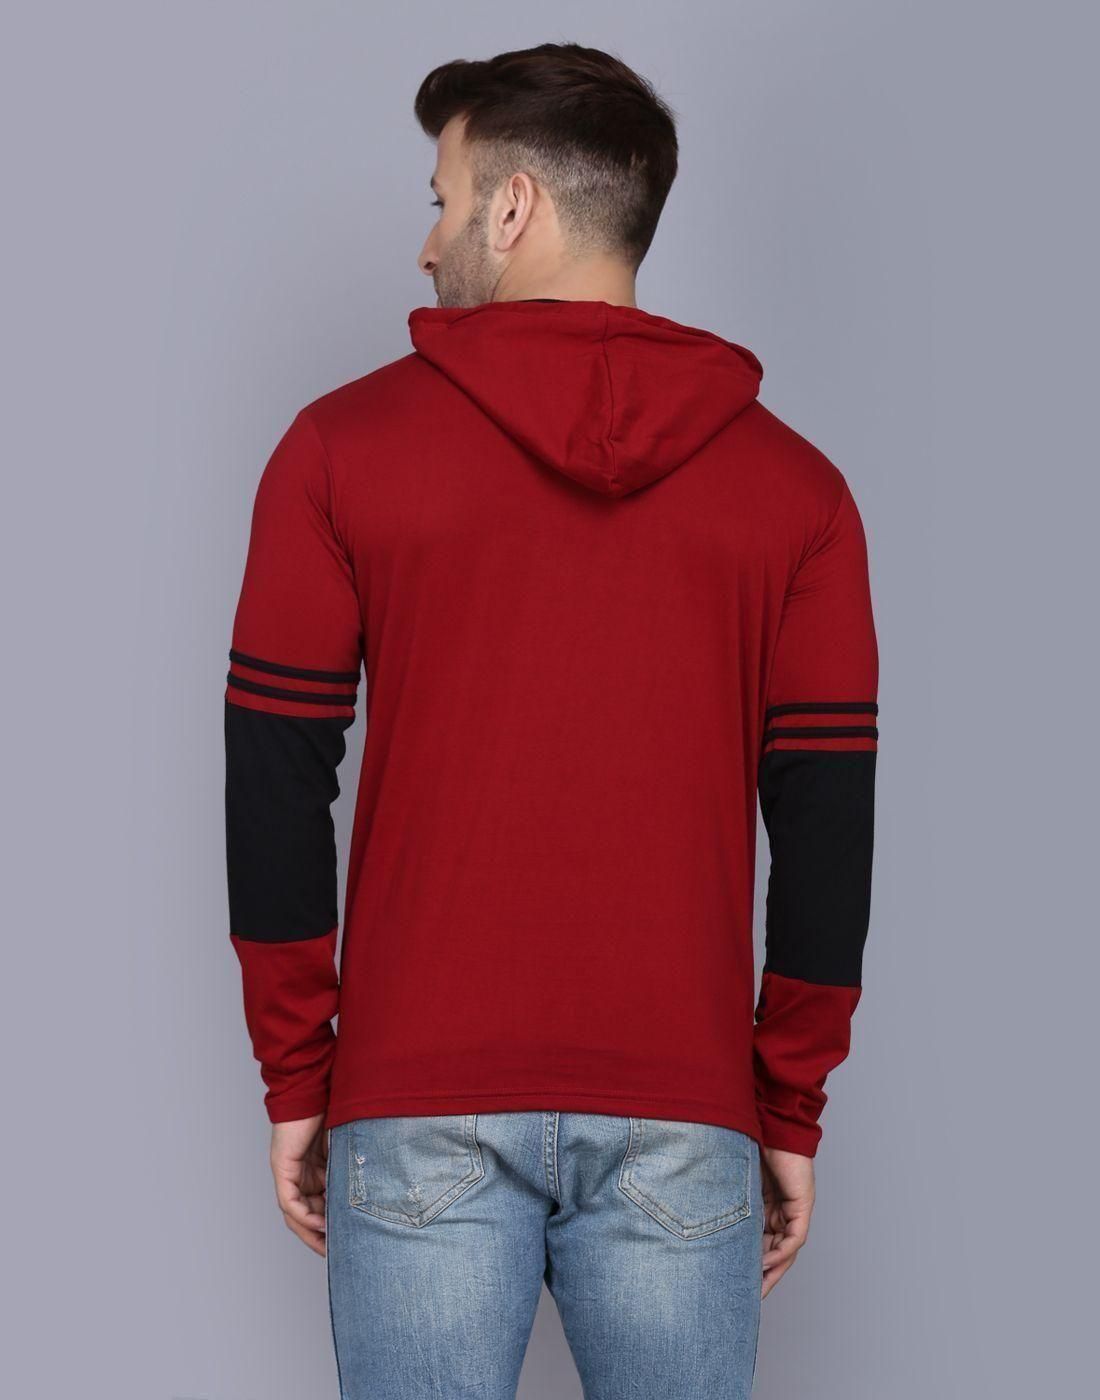 Cotton Solid Full Sleeves Hooded T-Shirts